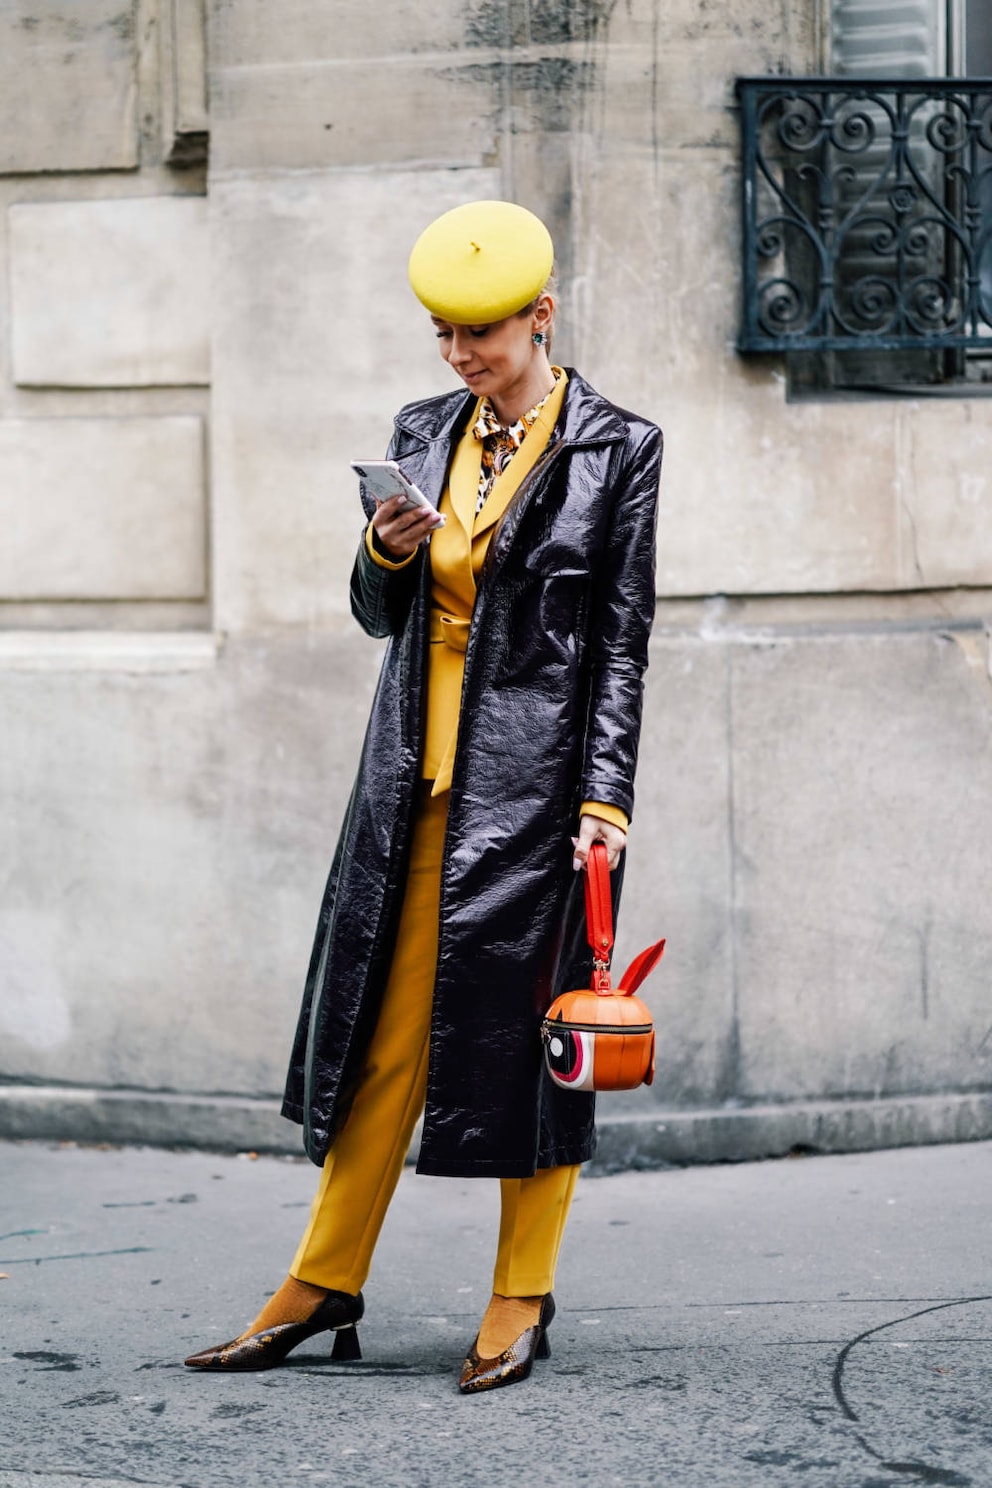 PARIS, FRANCE - MARCH 01: A guest wears a yellow beret hat, a yellow pantsuit, earrings, a shiny black vinyl raincoat, an orange-shaped handbag, a shiny golden python pattern pointy pumps with fantasy heels, yellow socks , outside Issey Miyake, during Paris Fashion Week Womenswear Fall/Winter 2019/2020, on March 01, 2019 in Paris, France. (Photo by Edward Berthelot/Getty Images)